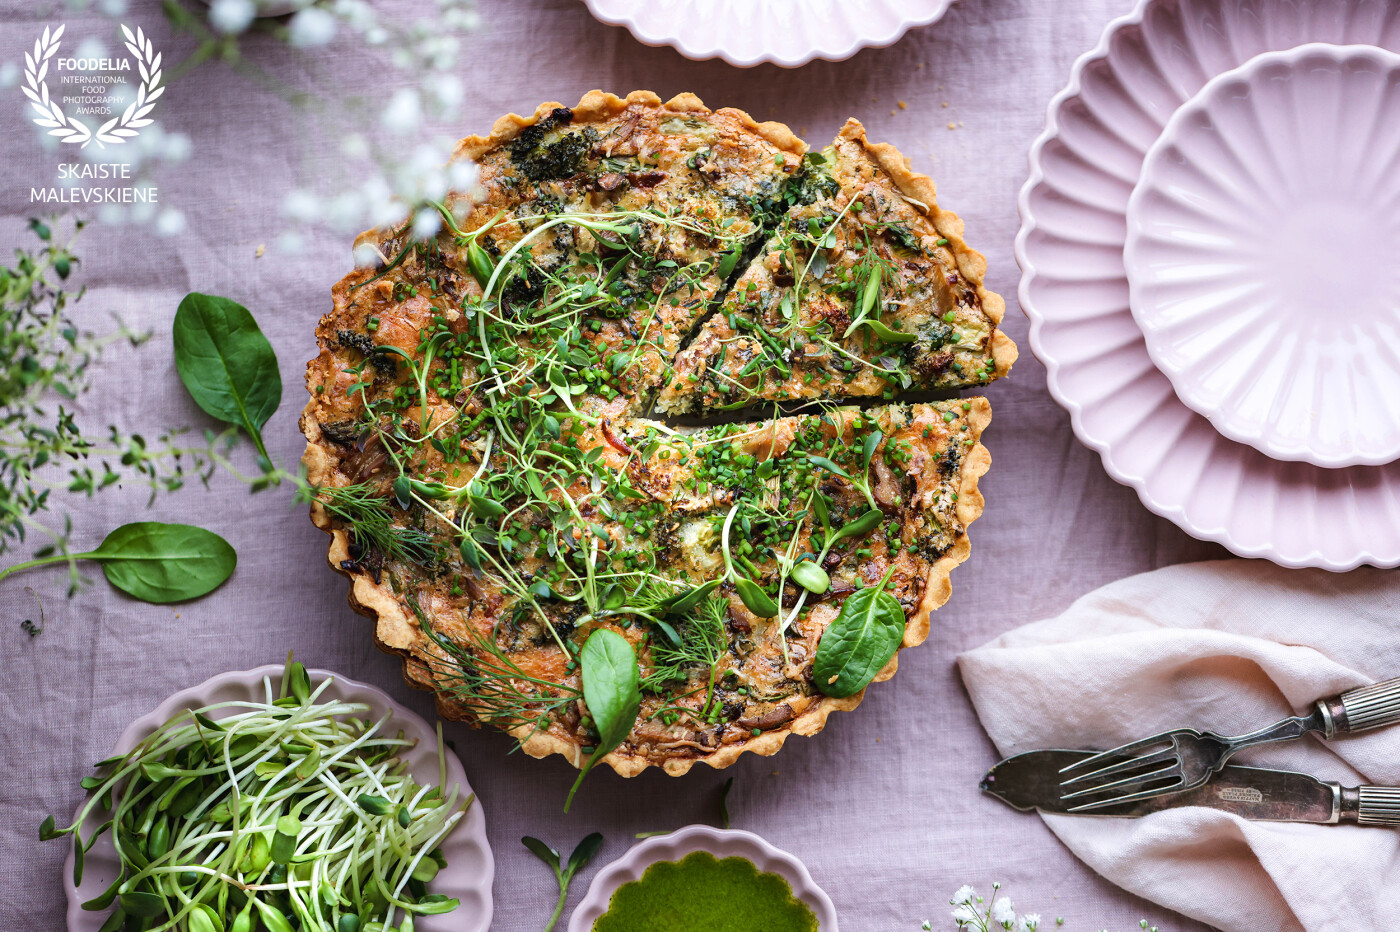 A beautiful quiche loaded with green vegetables: asparagus, broccoli, spinach. I have also added some oyster mushrooms and all the aromatic herbs: fresh dill, parsley, thyme and a pinch of nutmeg for a final touch.